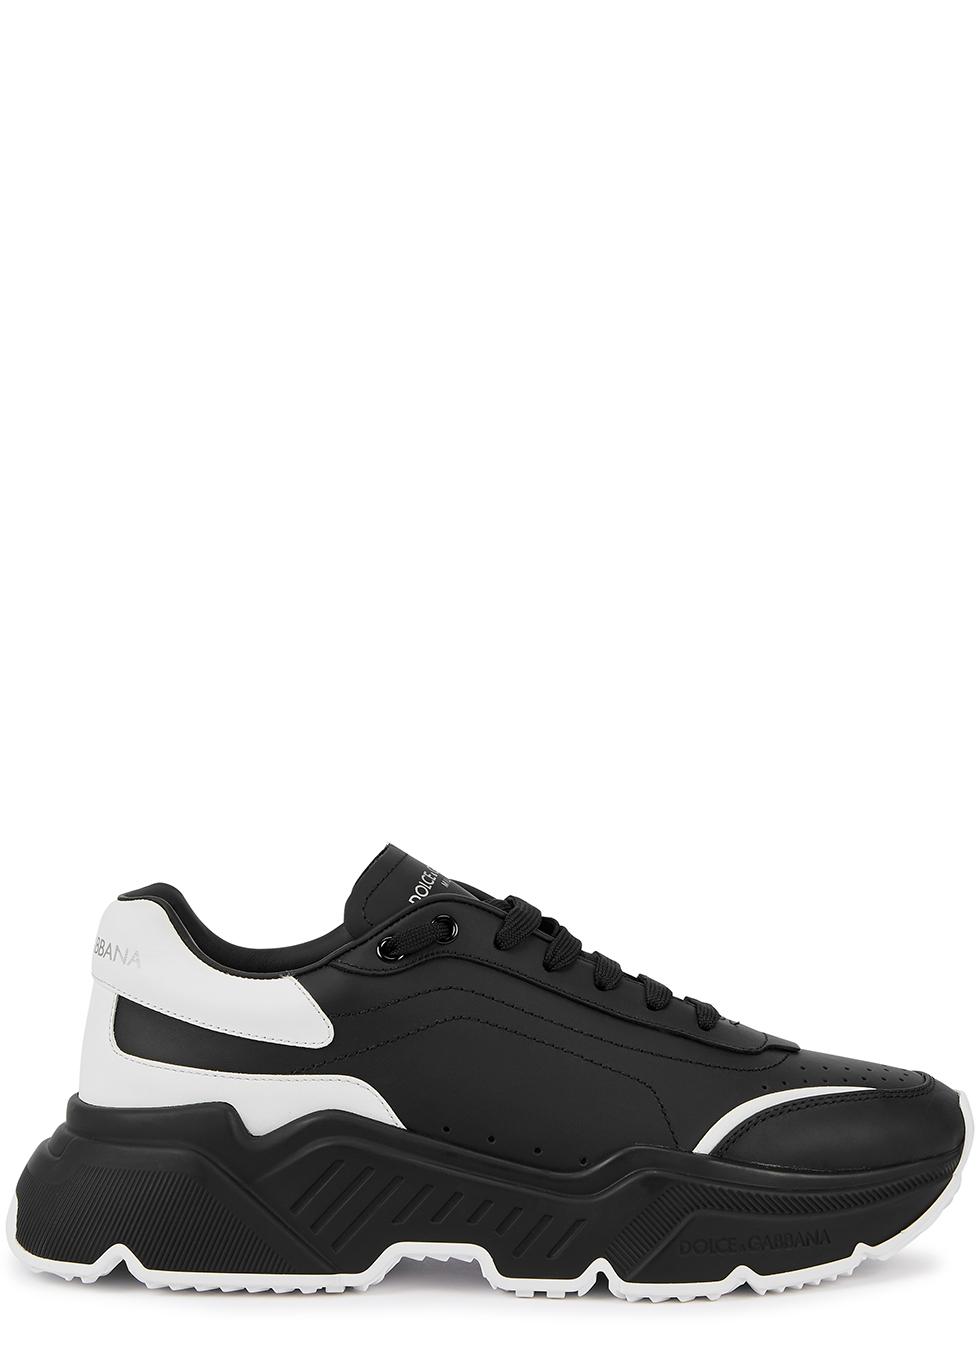 Dolce & Gabbana Daymaster Black Leather Sneakers | Lyst